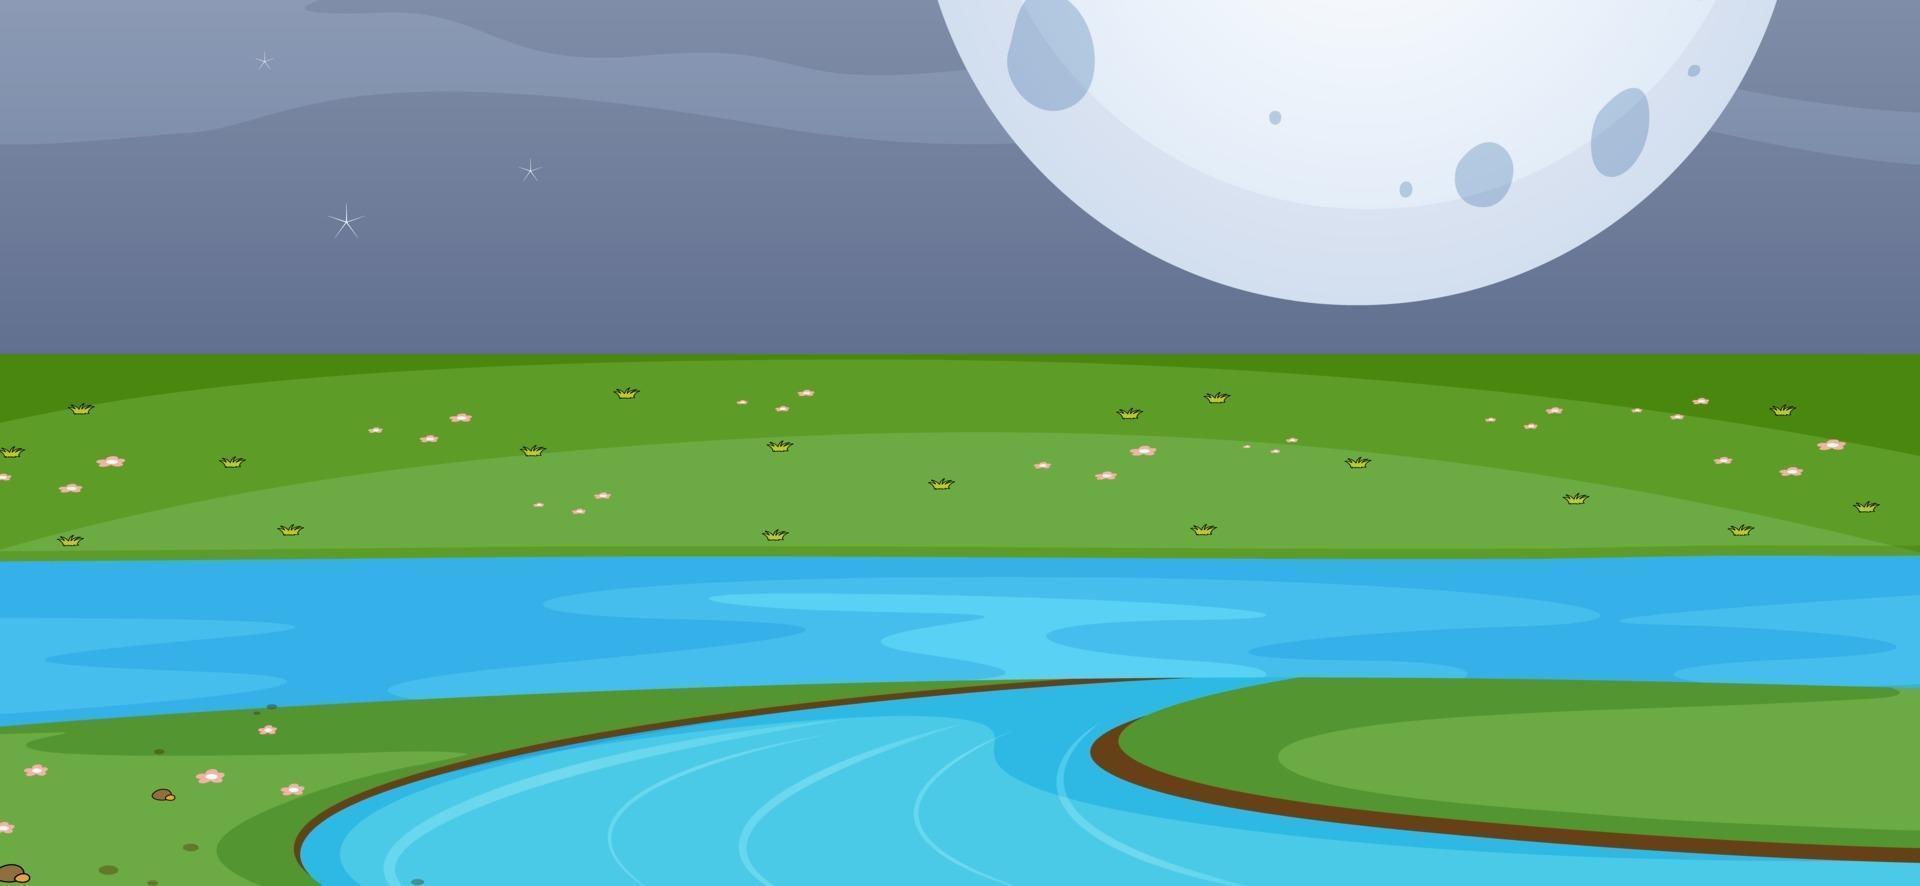 Empty park scene at night with the big moon in simple style vector